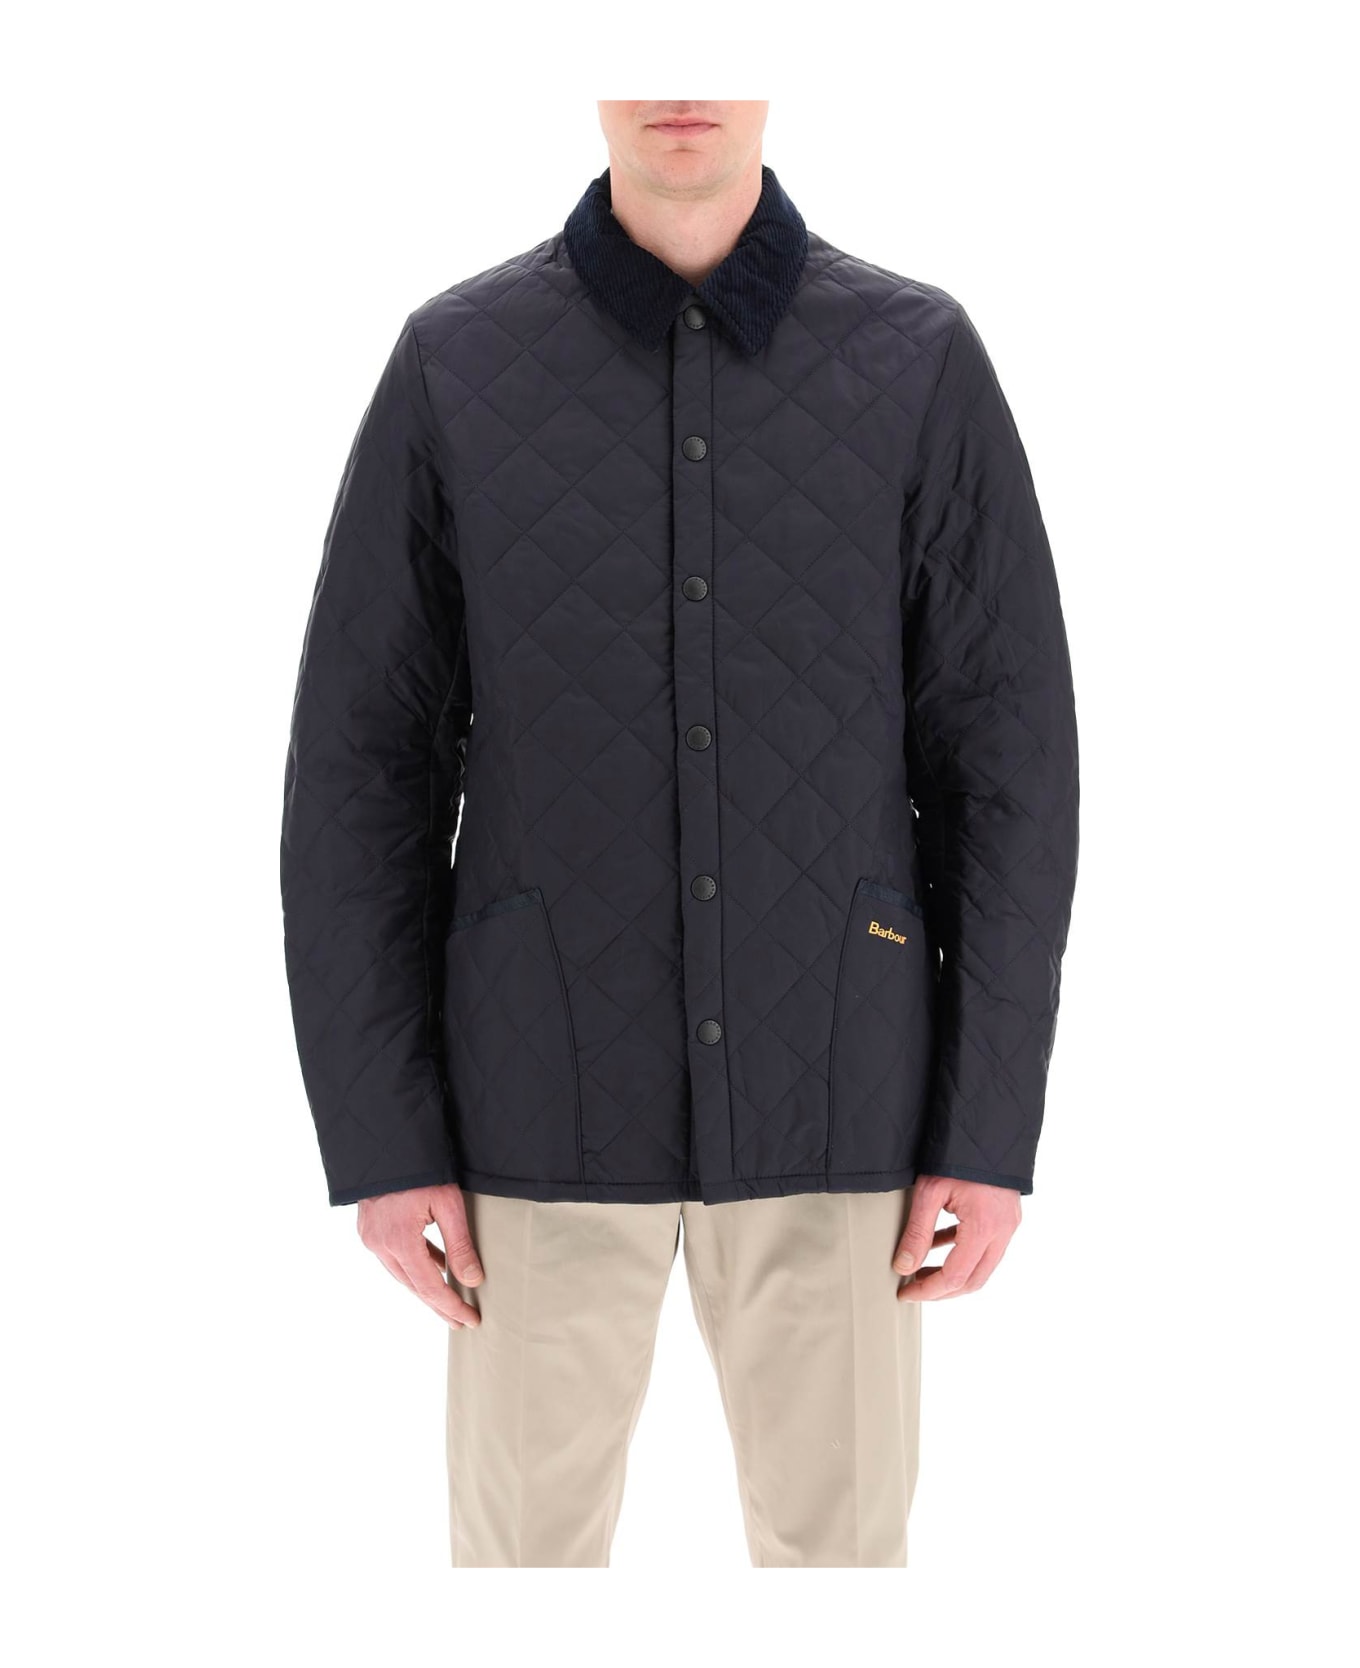 Barbour Liddesdale Quilted Jacket | italist